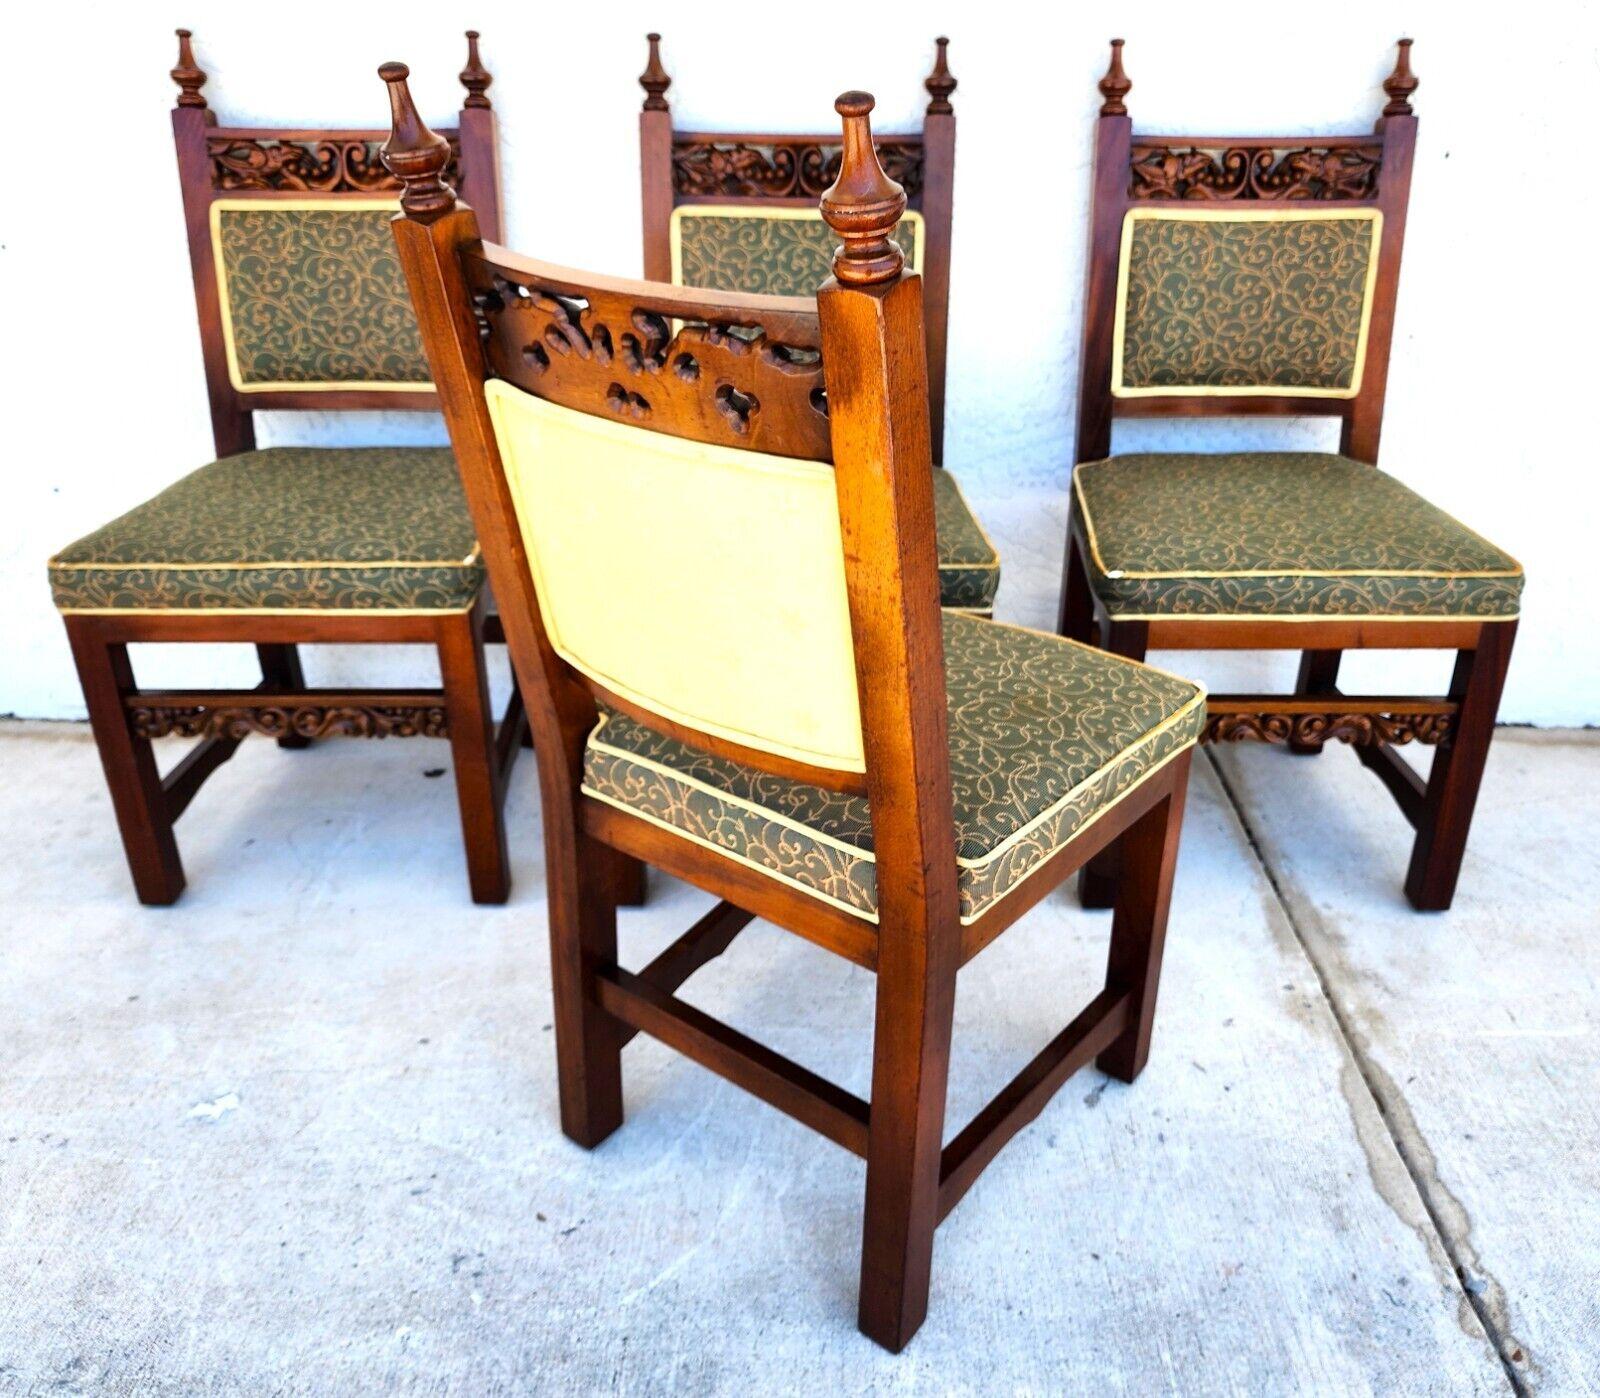 For FULL item description click on CONTINUE READING at the bottom of this page.
Offering One Of Our Recent Palm Beach Estate fine Furniture Acquisitions Of A 
Set of 4 midcentury Italian Revival Dining Chairs
The backs of the chairs feature